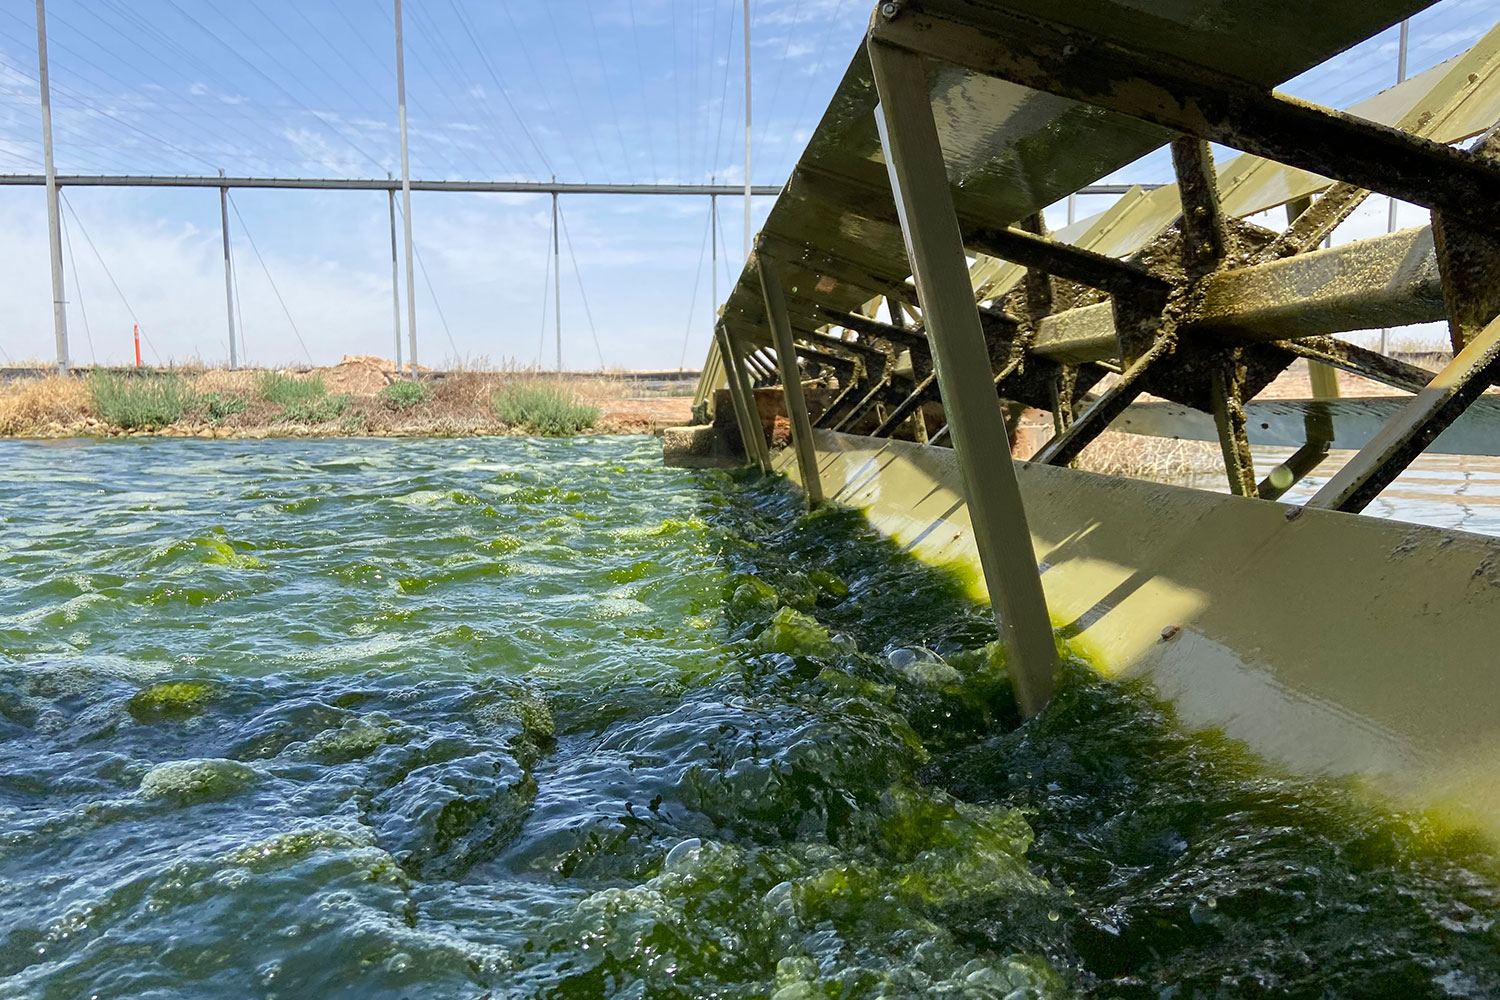 Green algae-filled water churns and bubbles against paddlewheel